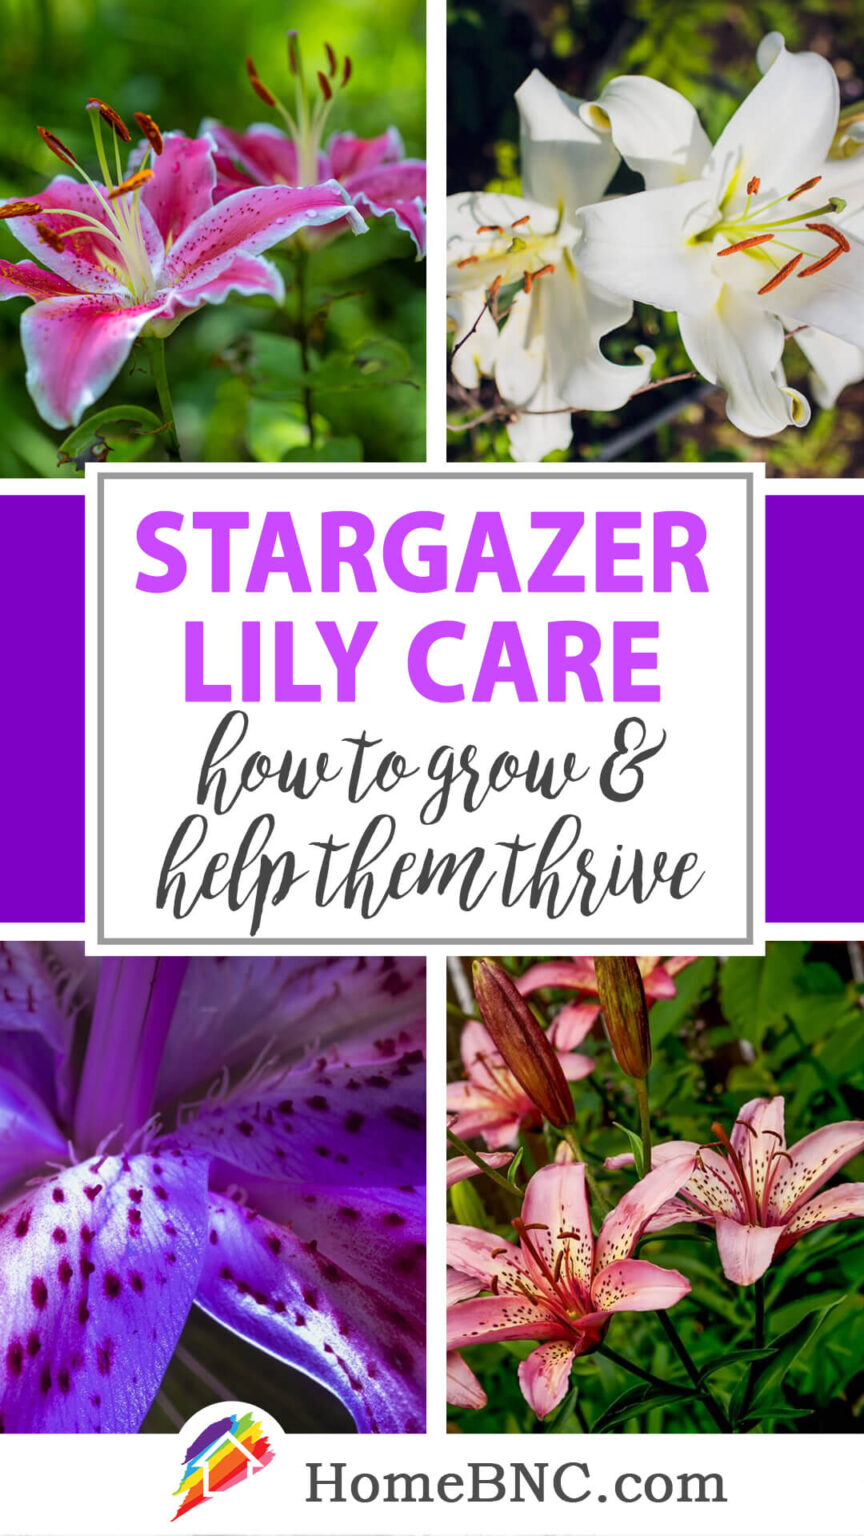 Stargazer Lily Care – How to Plant, Grow and Help Them Thrive